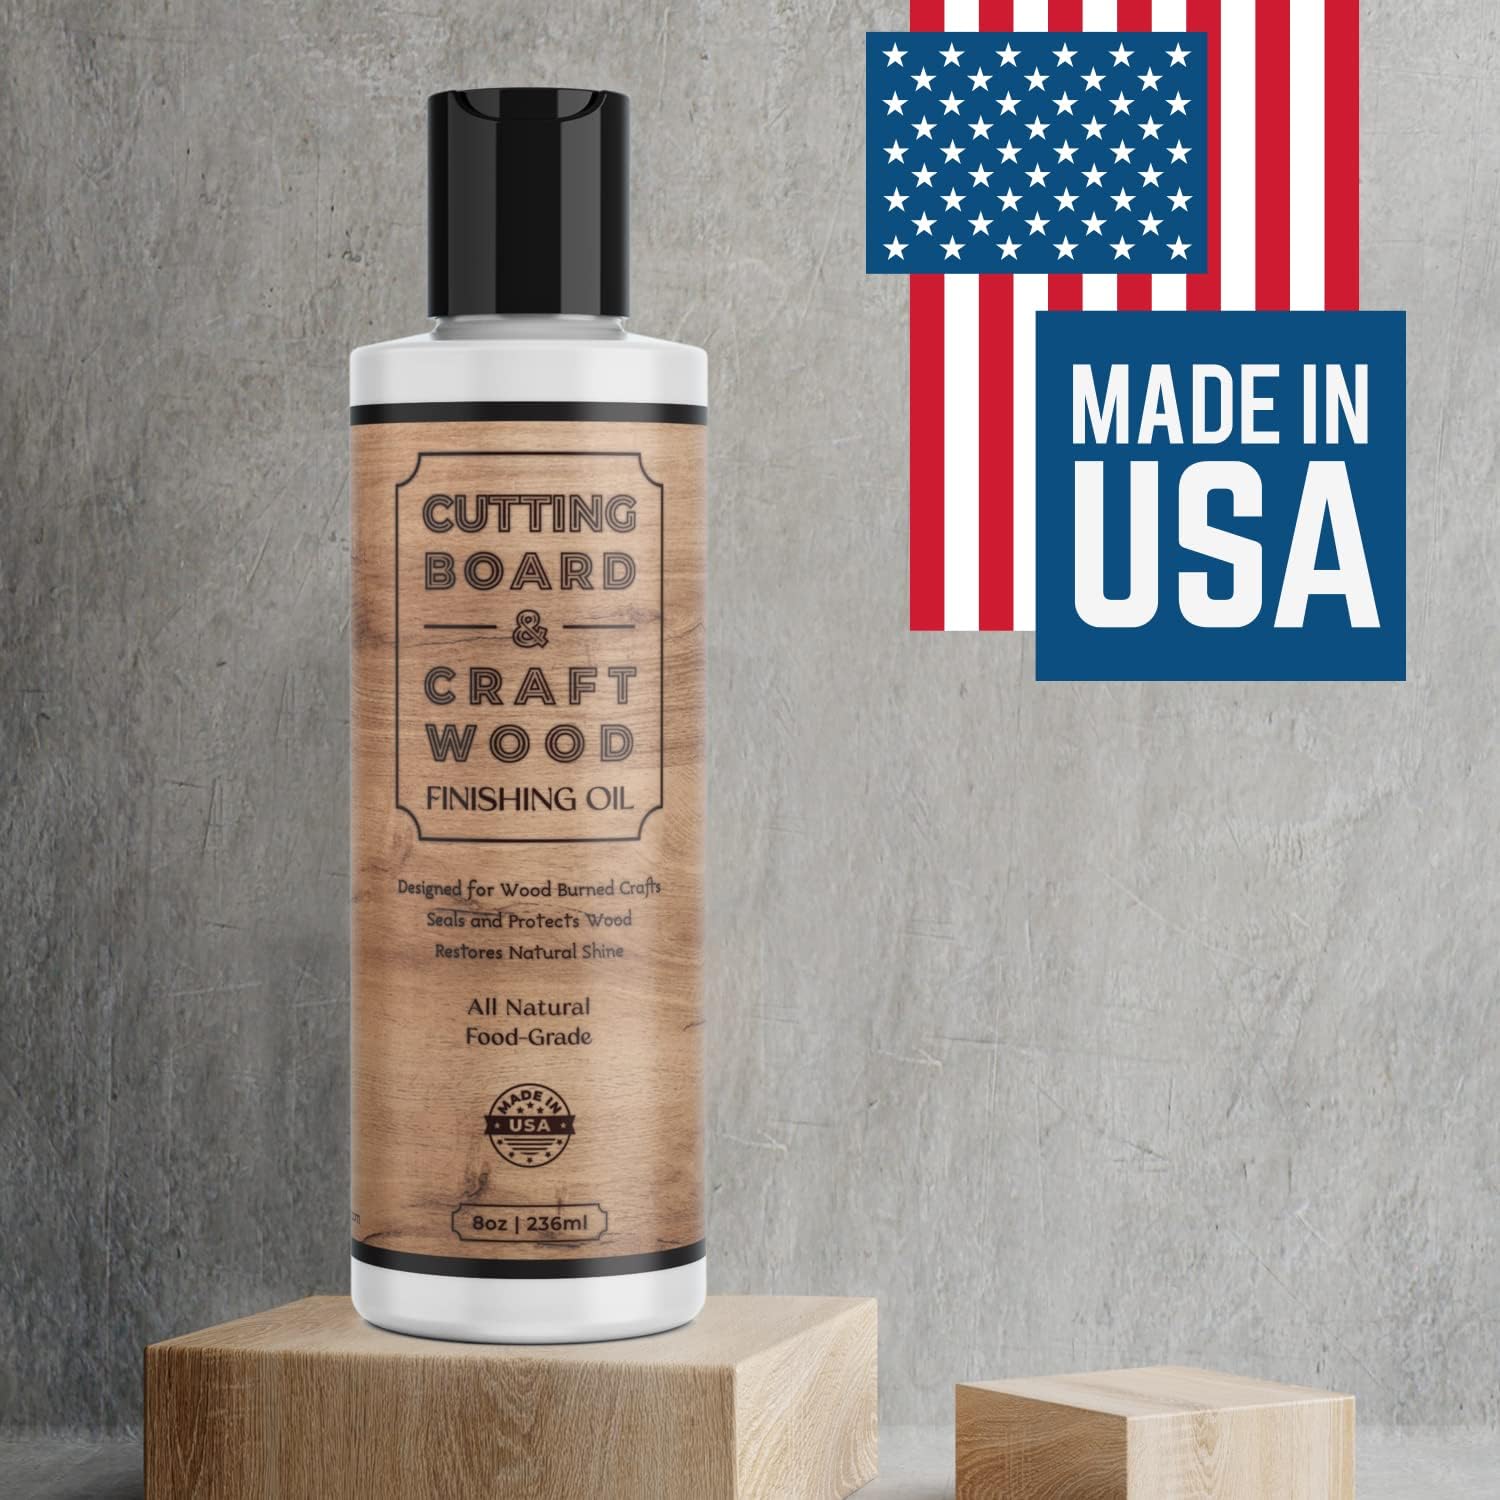 Craft Wood Finishing Oil + Conditioner - 8oz Food-Safe Wood Oil With Citrus Scent - Made in USA - Natural Mineral Oil for Cutting Board, Butcher Block, Kitchen Utensils - Oil + Seal Wood Burned Crafts : Health & Household